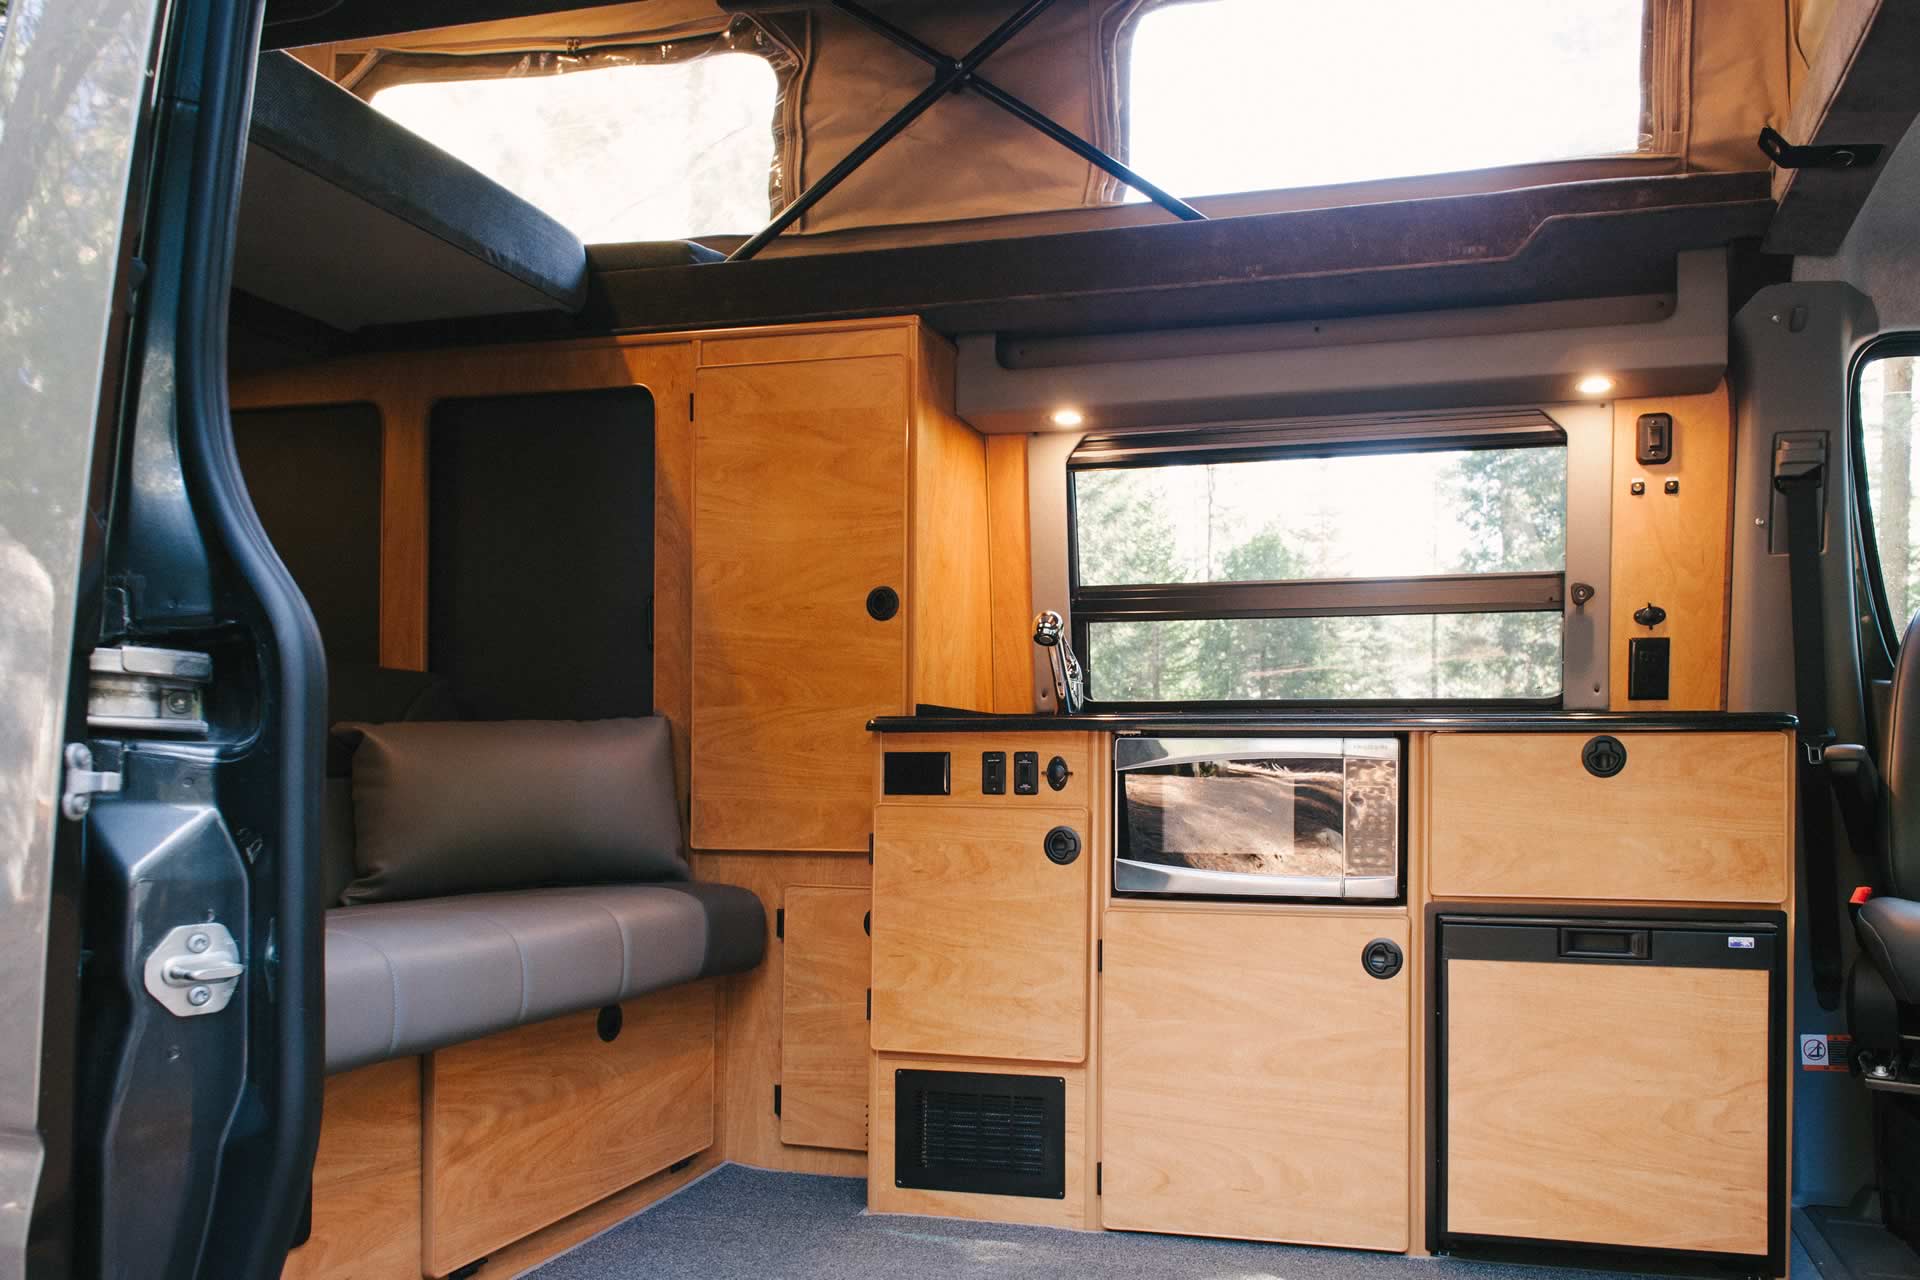 Interior view of Sportsmobile camper van converison with the penthouse top open.